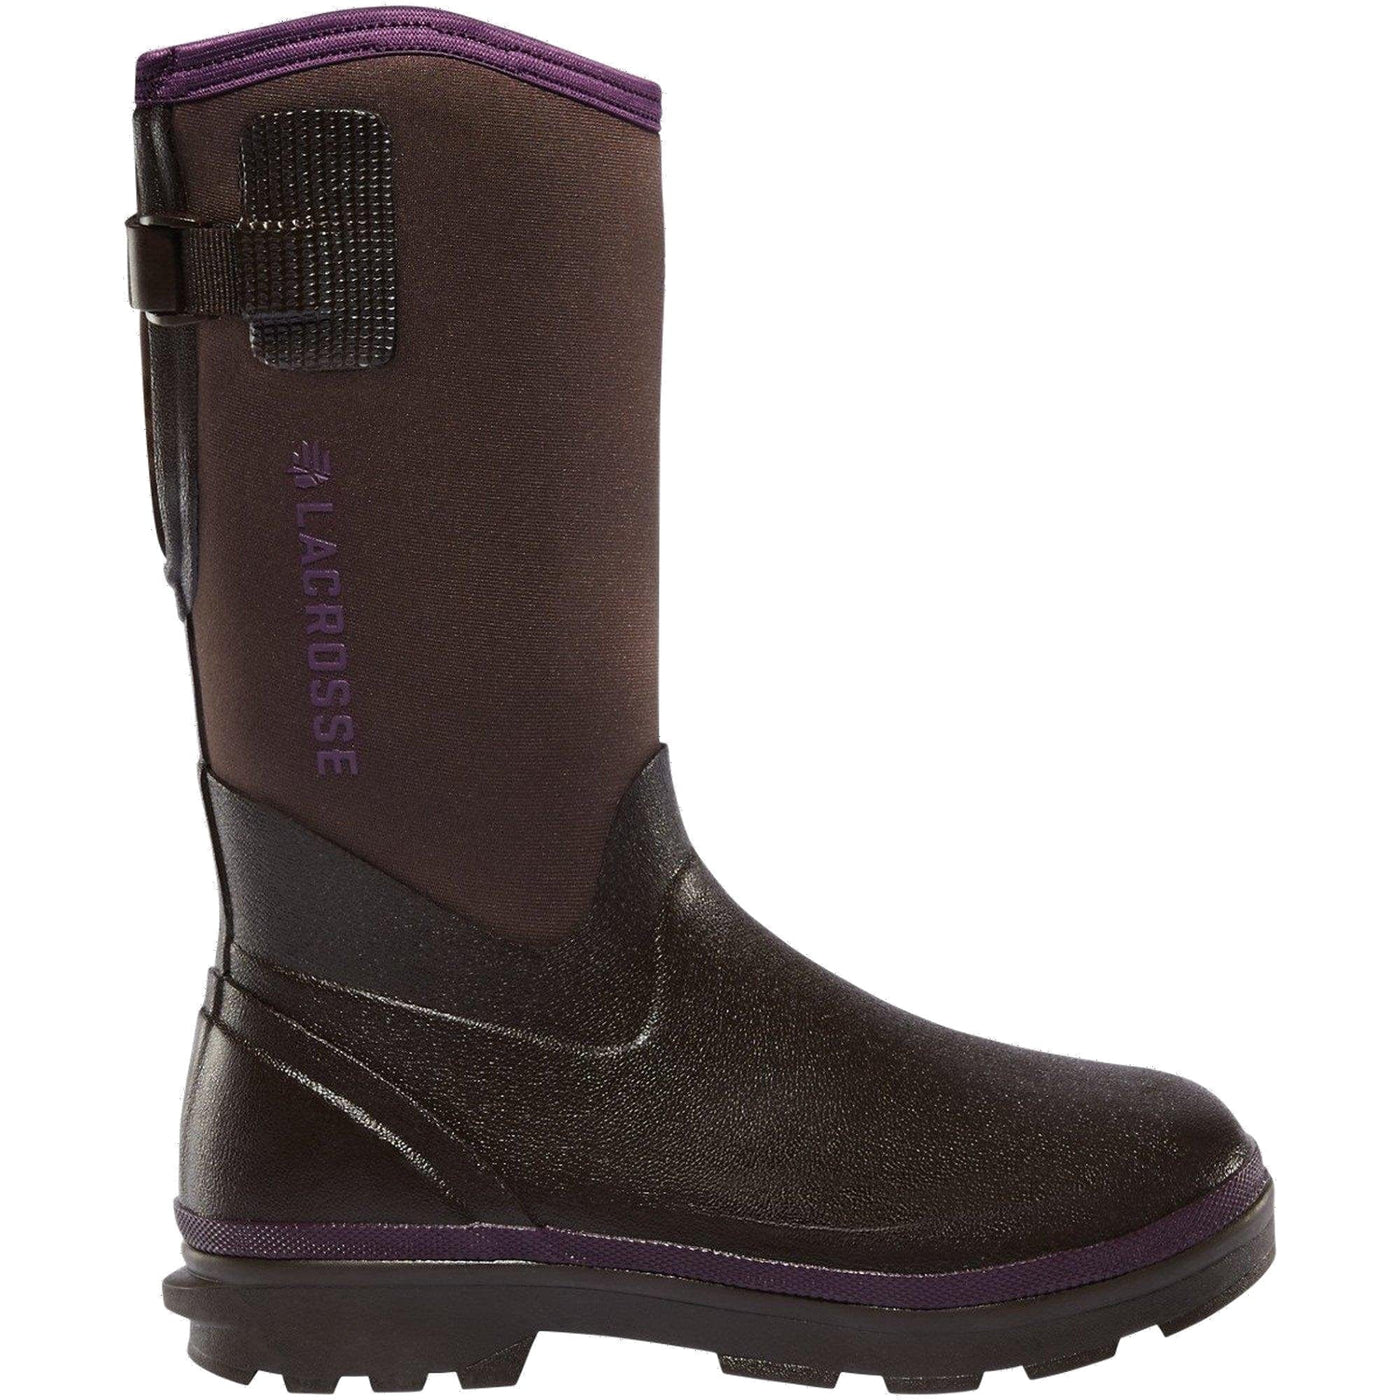 Lacrosse-Womens-Alpha-Range-12-5.0MM-chocolate-plum-insulated-boots